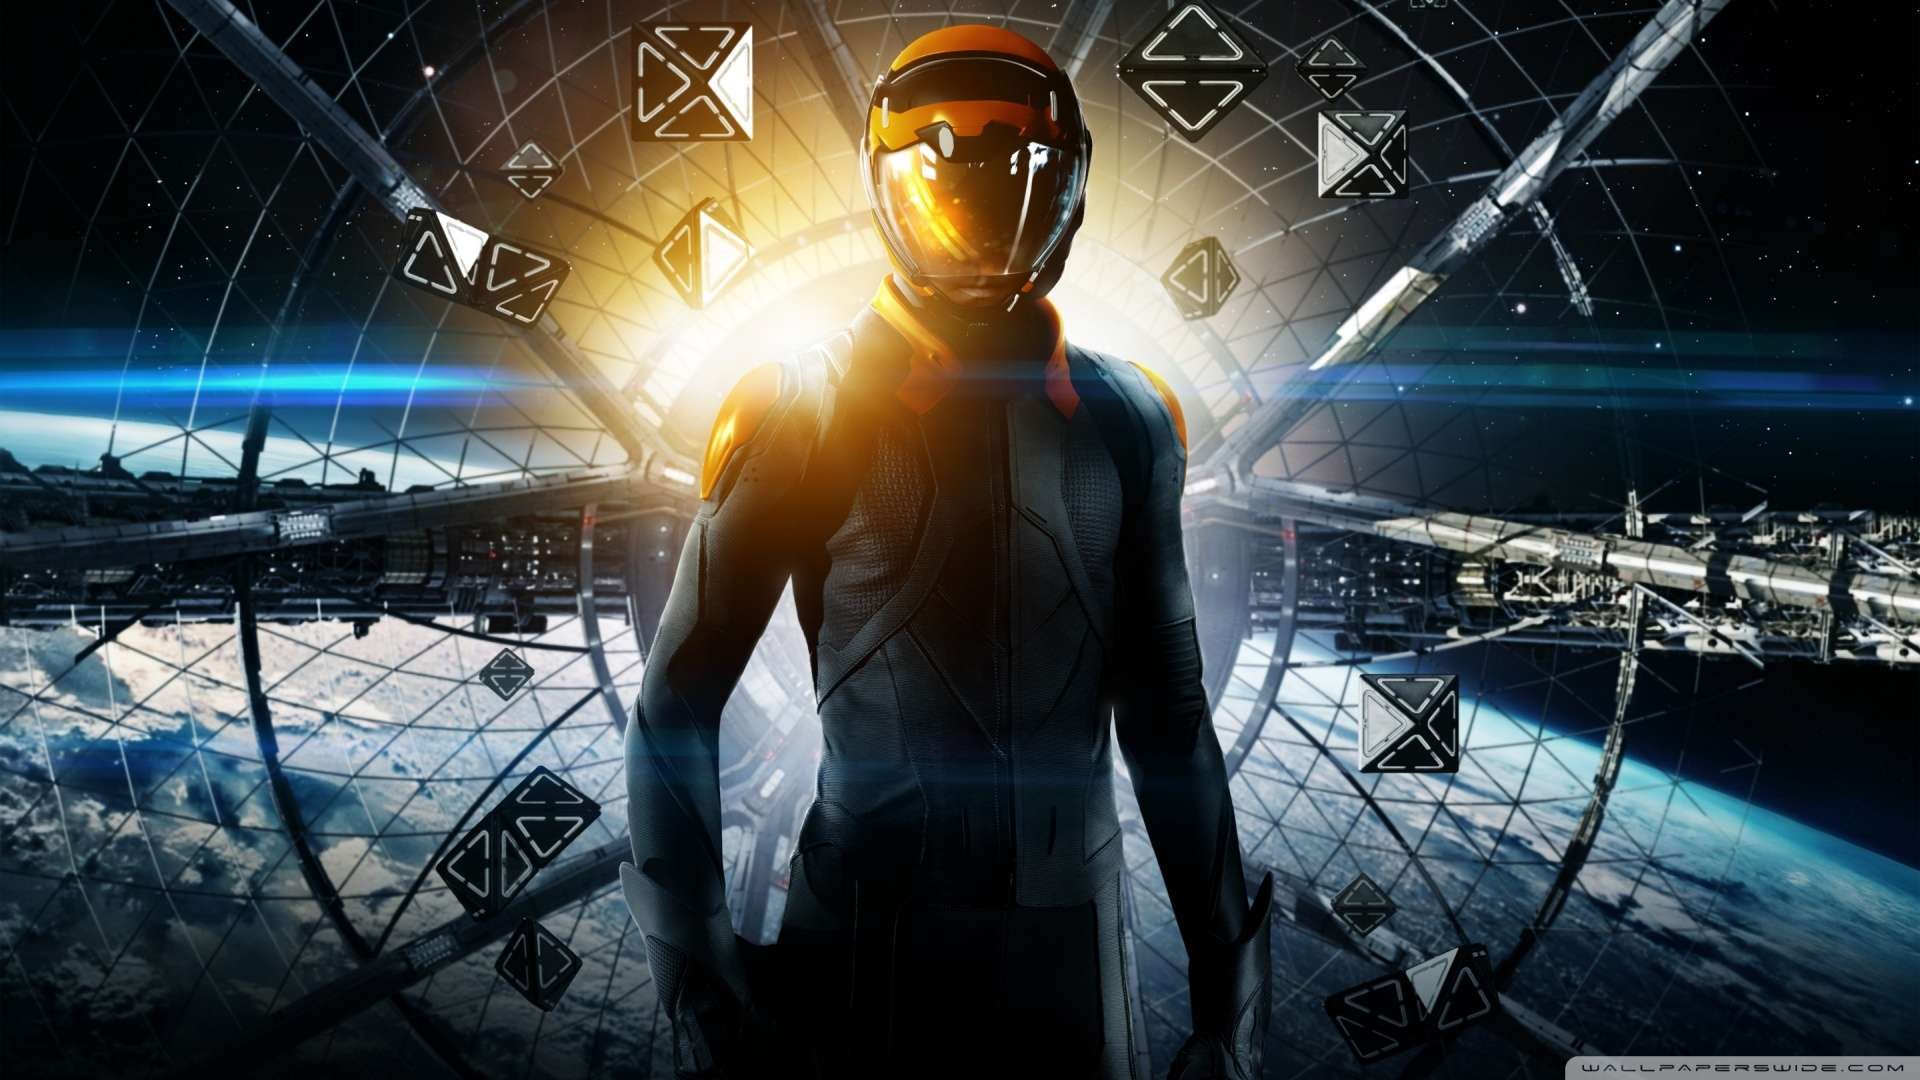 Wallpaper Enders Game Sci Fi Movie 1080p HD Upload At